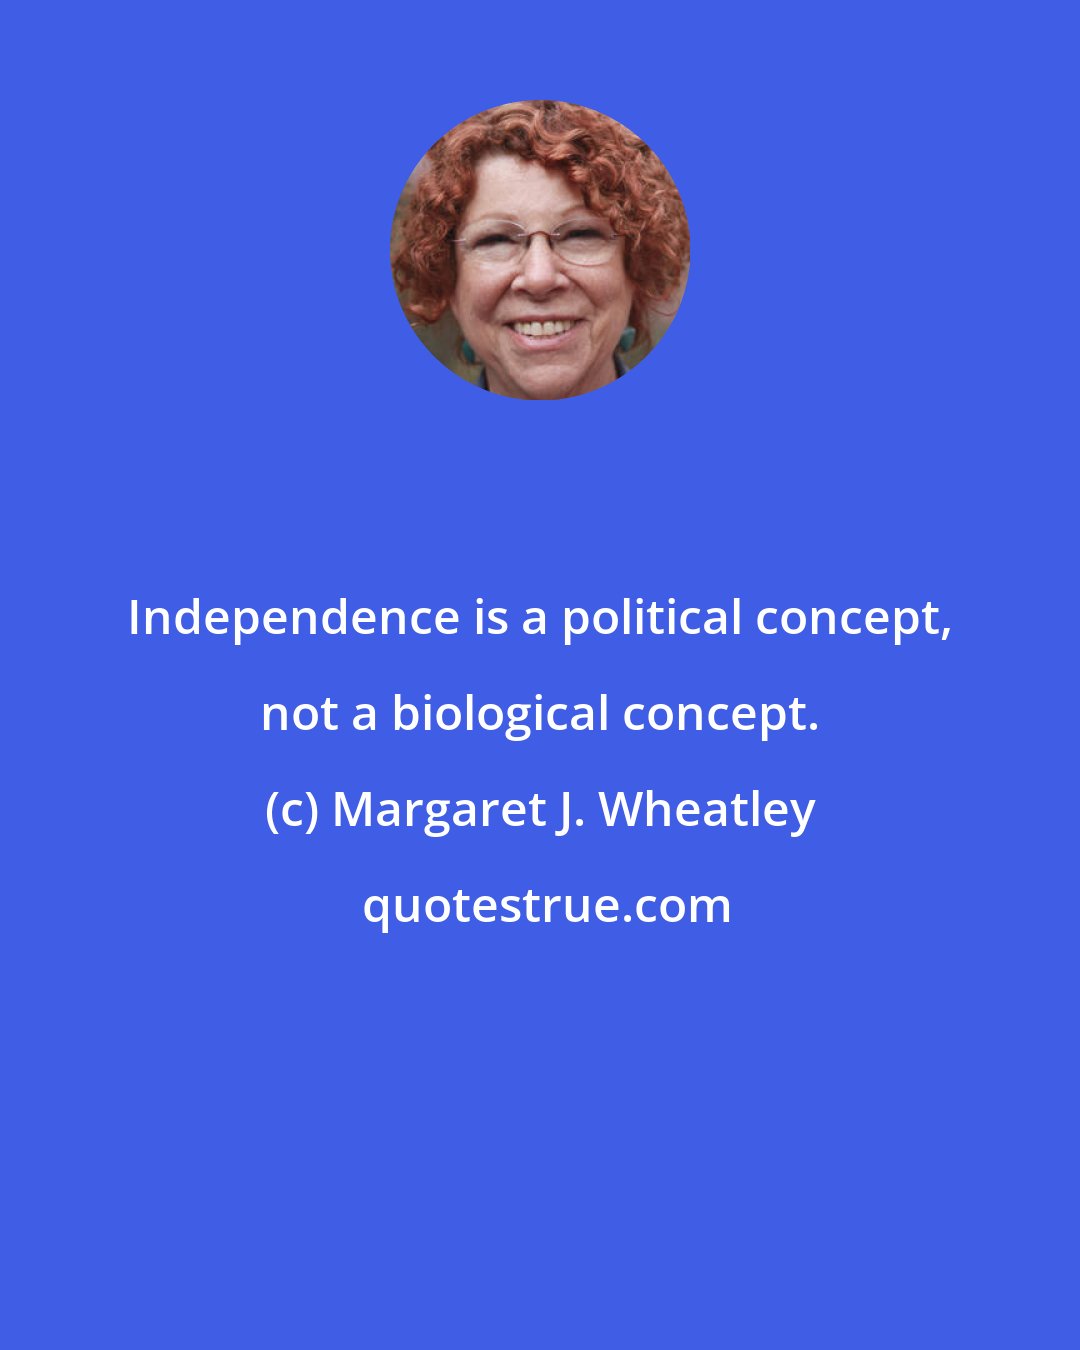 Margaret J. Wheatley: Independence is a political concept, not a biological concept.